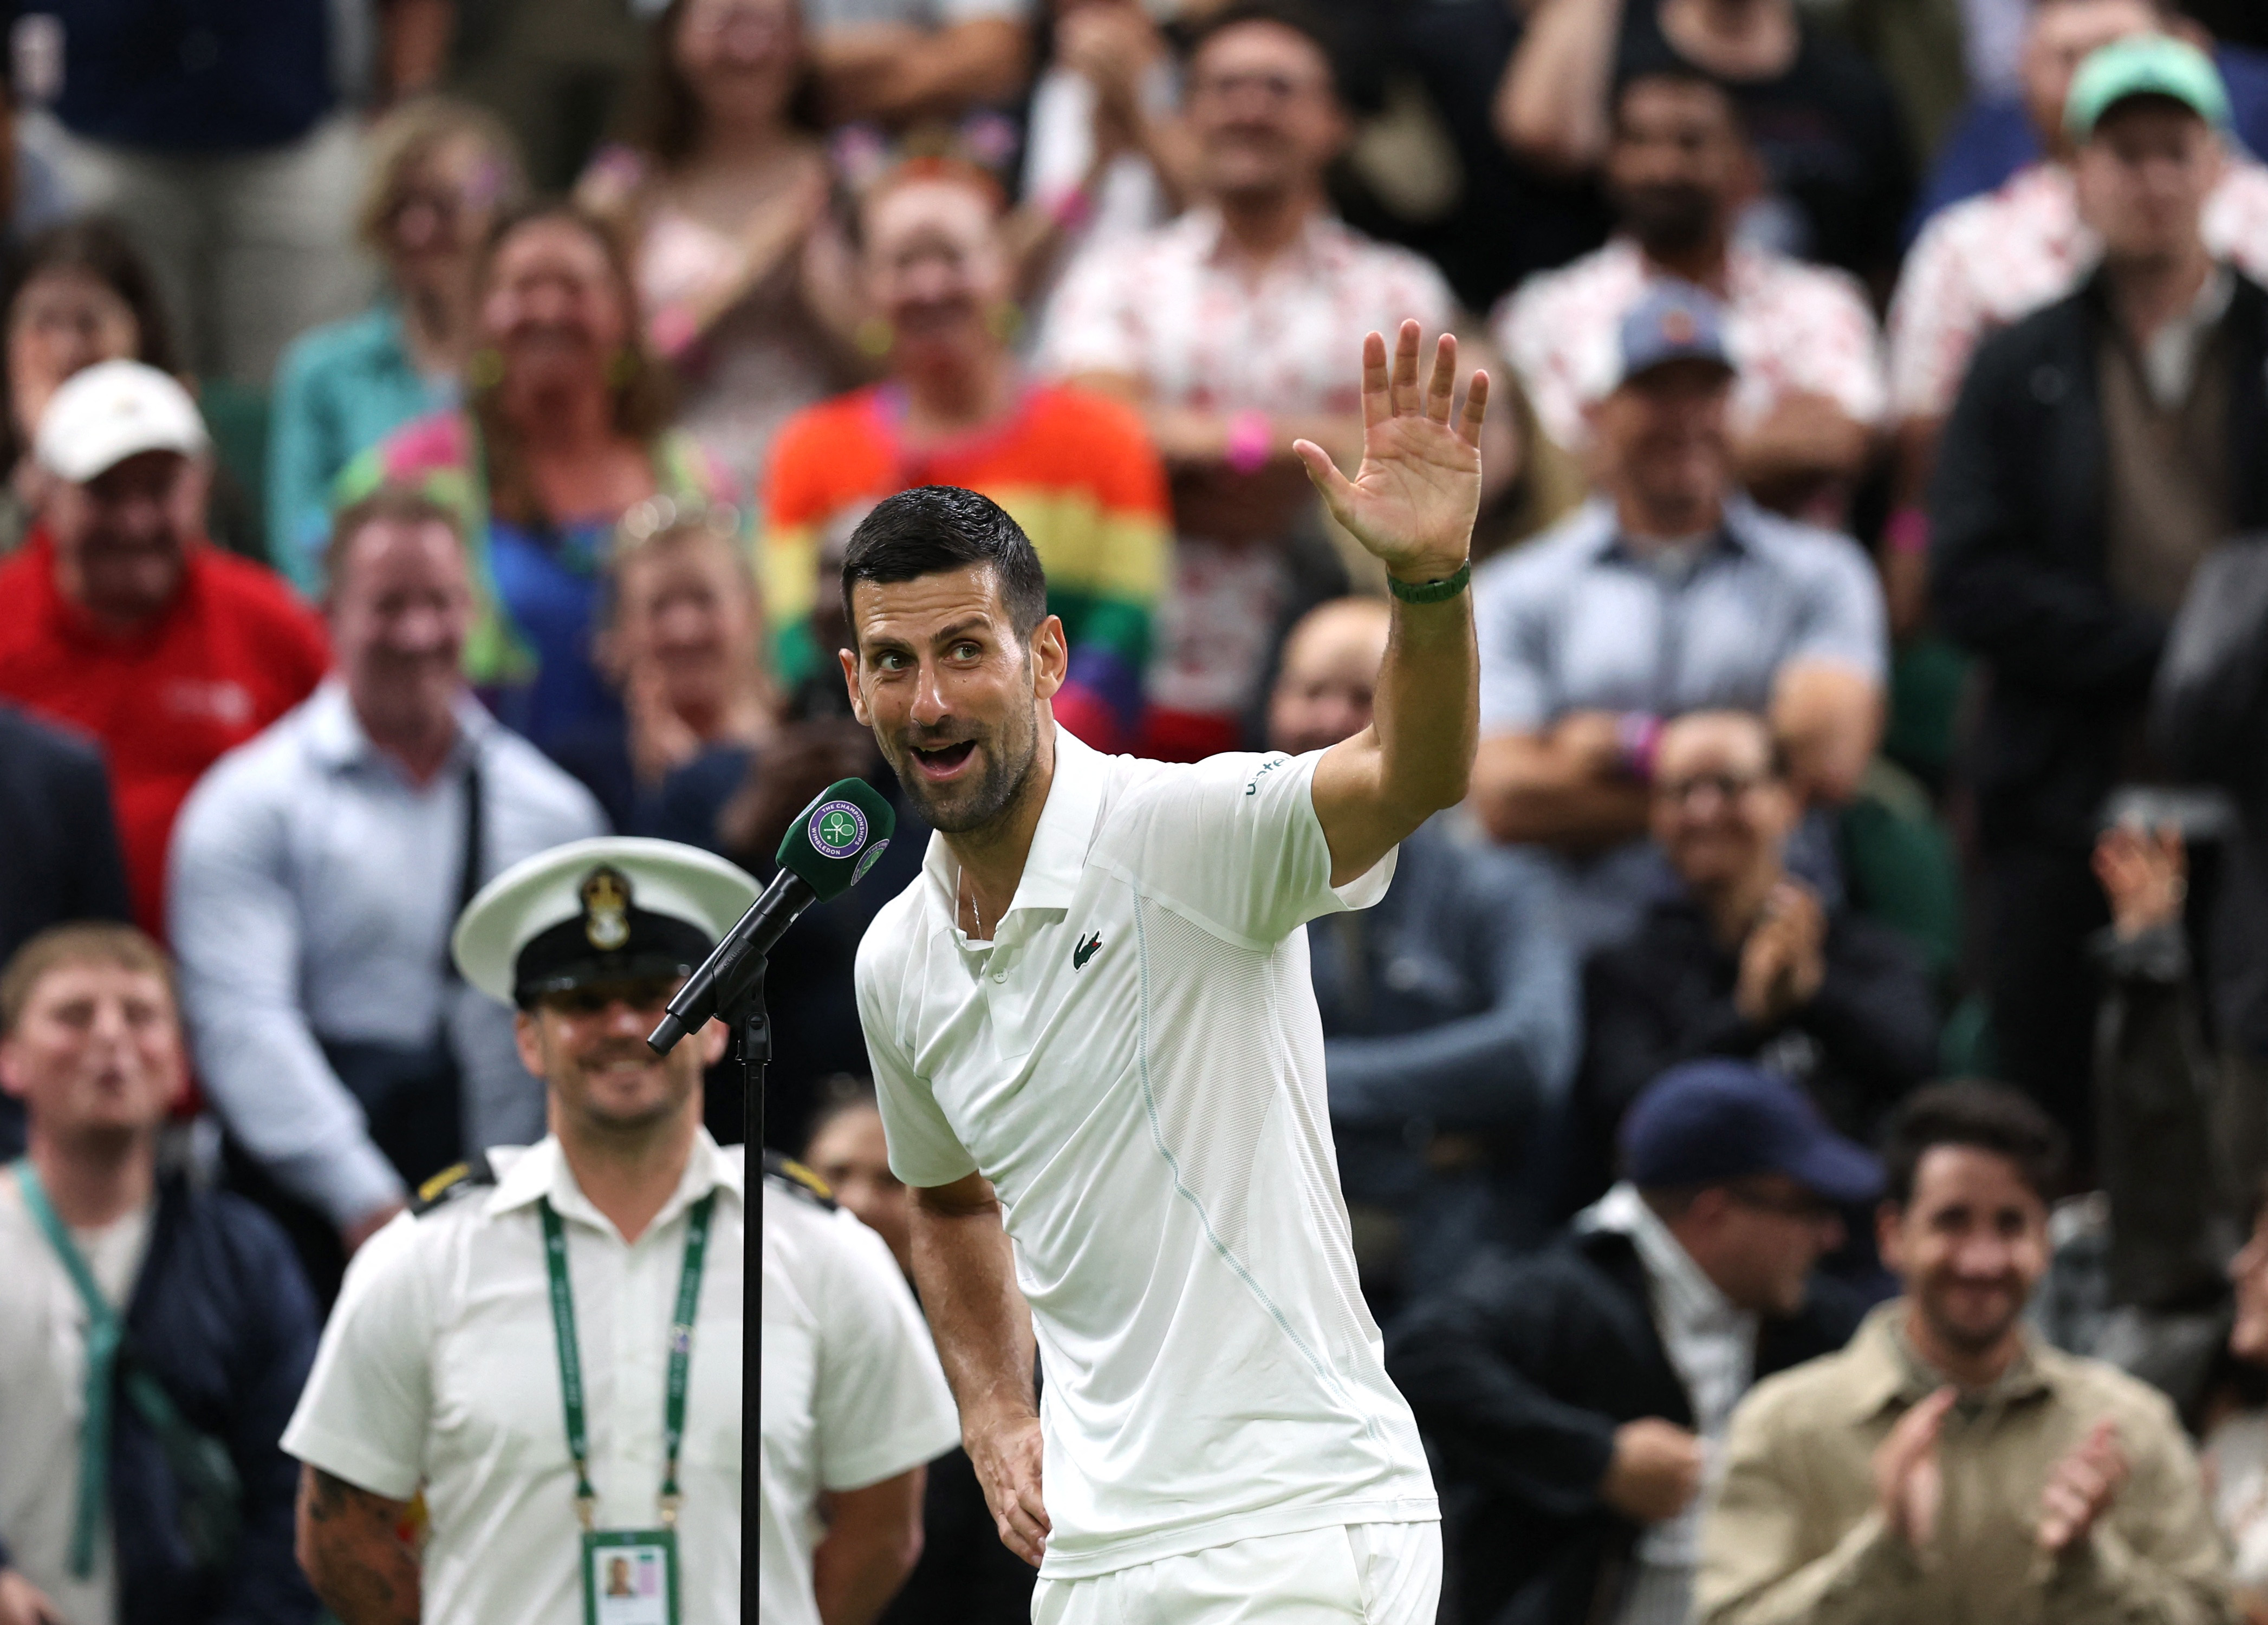 Djokovic lets rip after majestic performance, Zverev bows out ‘on one leg’ (wrapup 2)